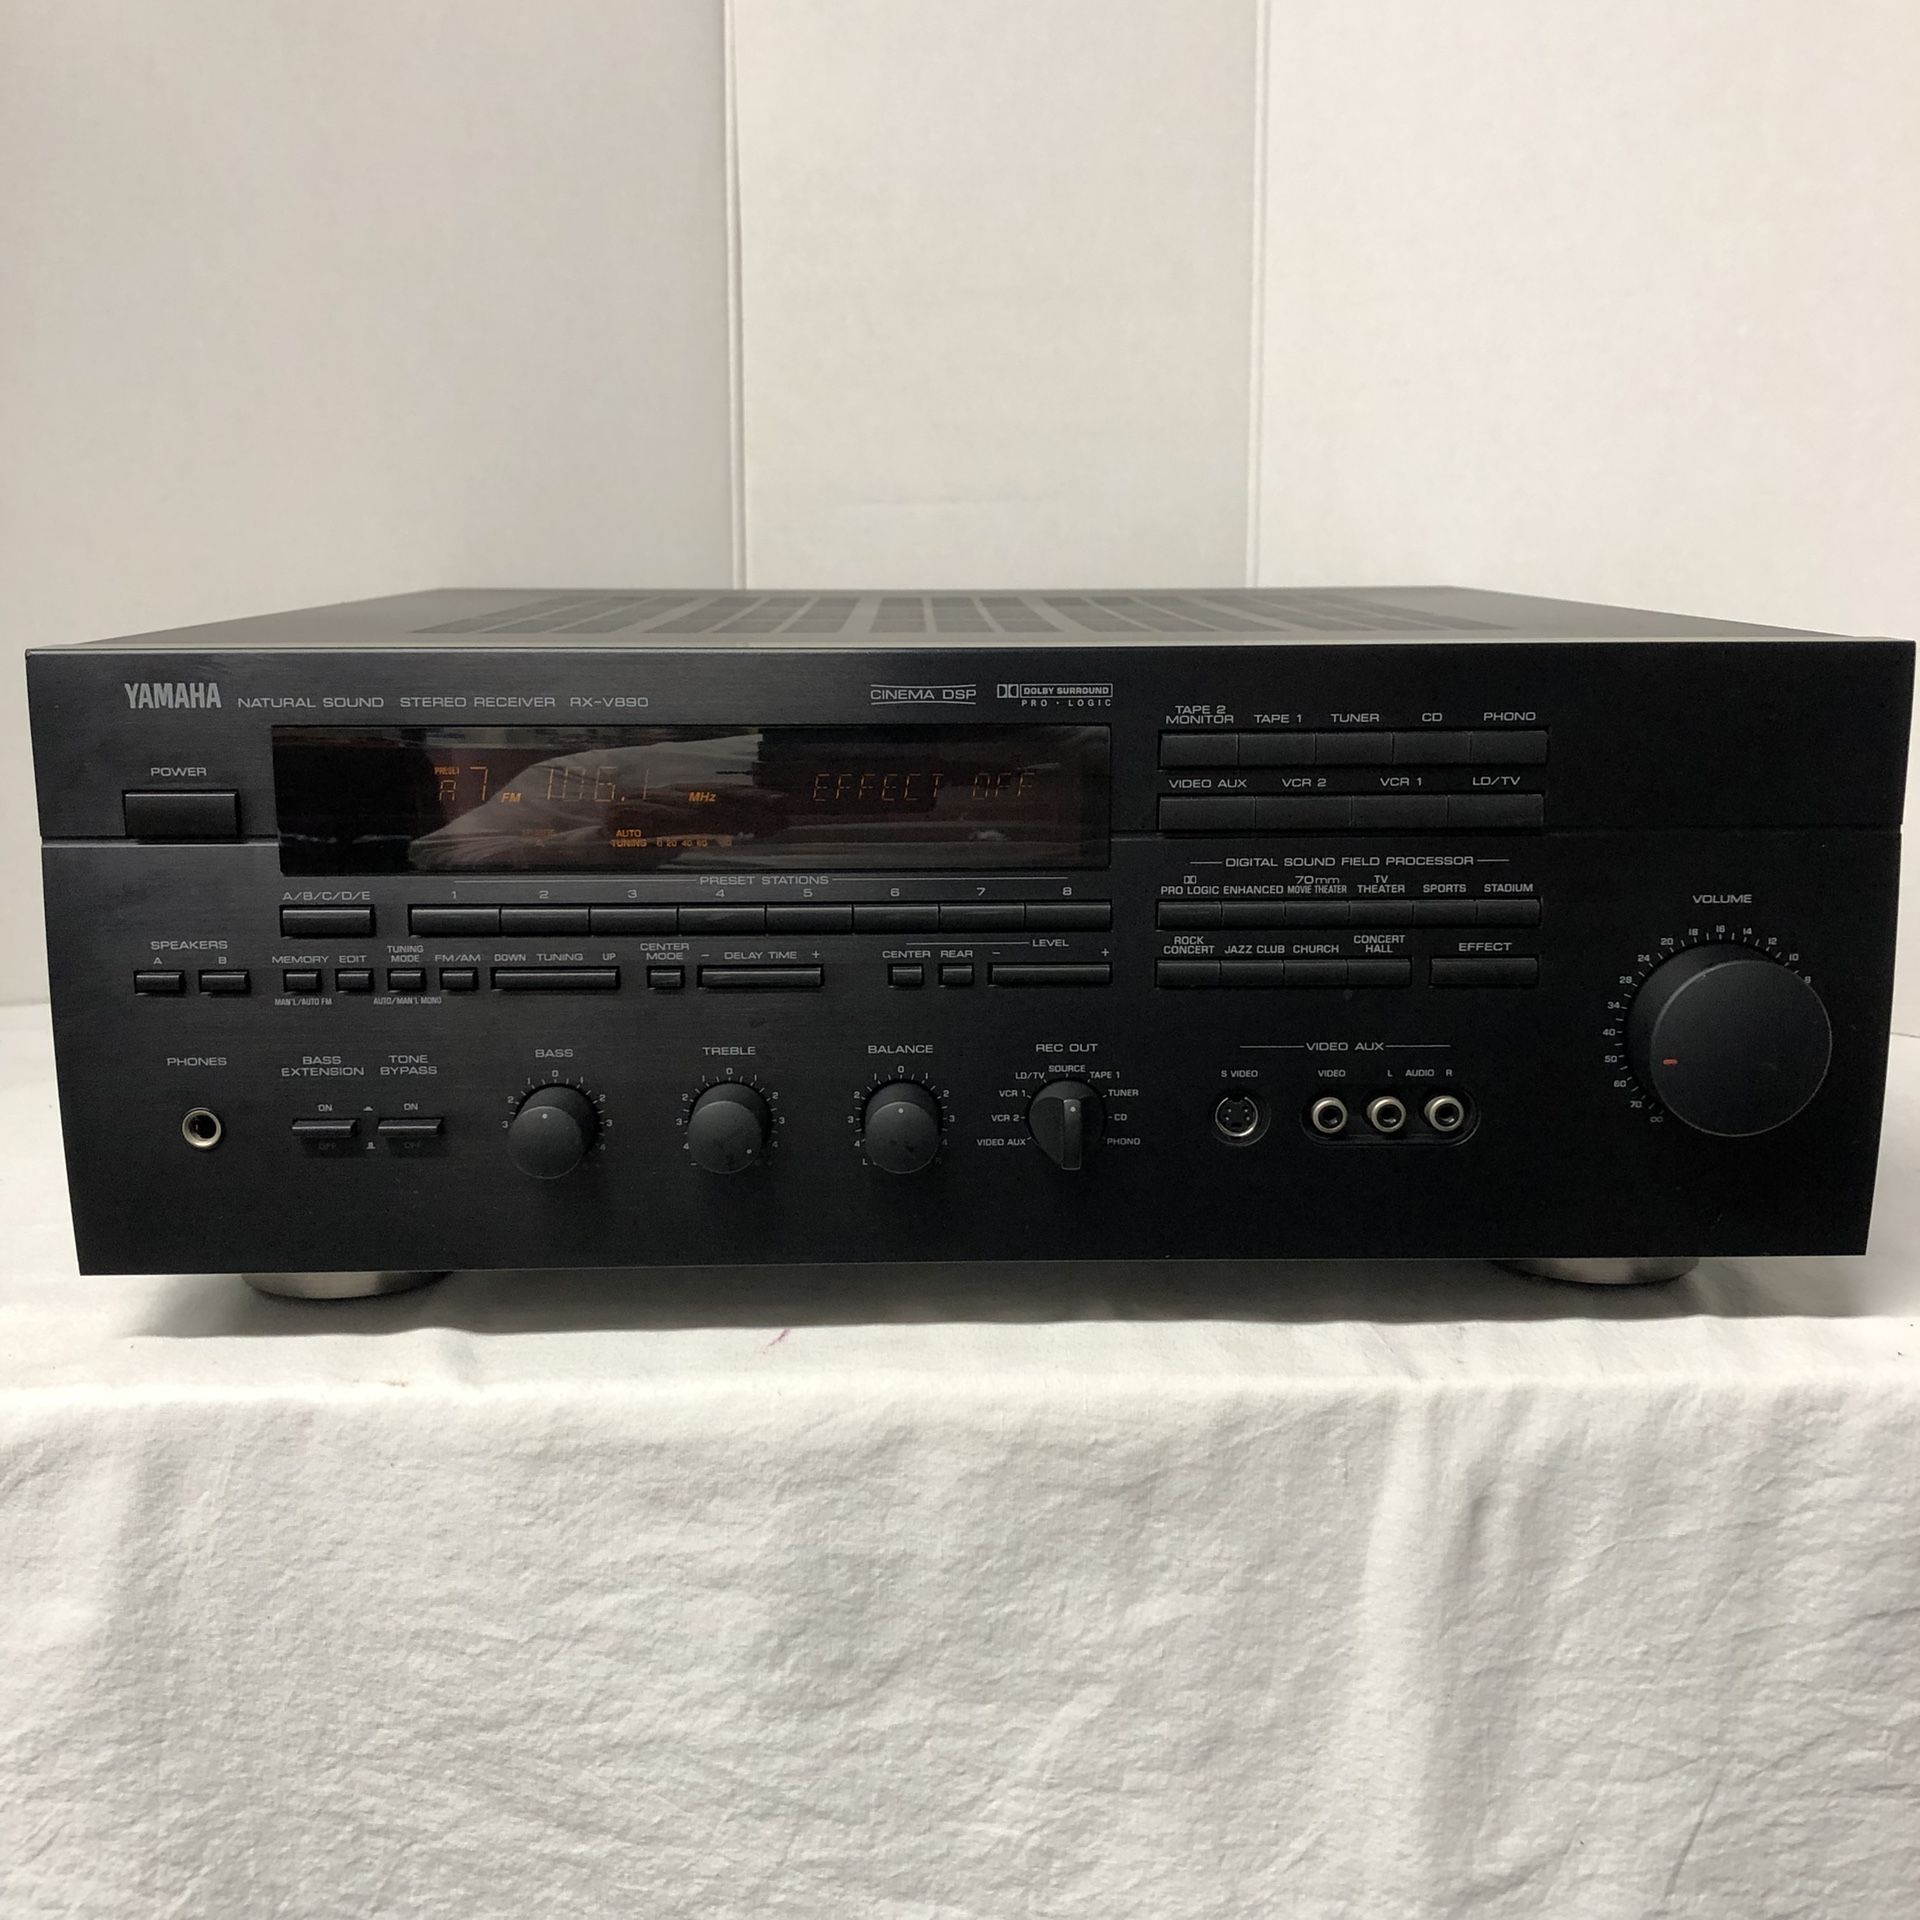 Yamaha Mega 5.1 Channel Receiver Near Vintage Good Condition Sounds Great with Yamaha Remote